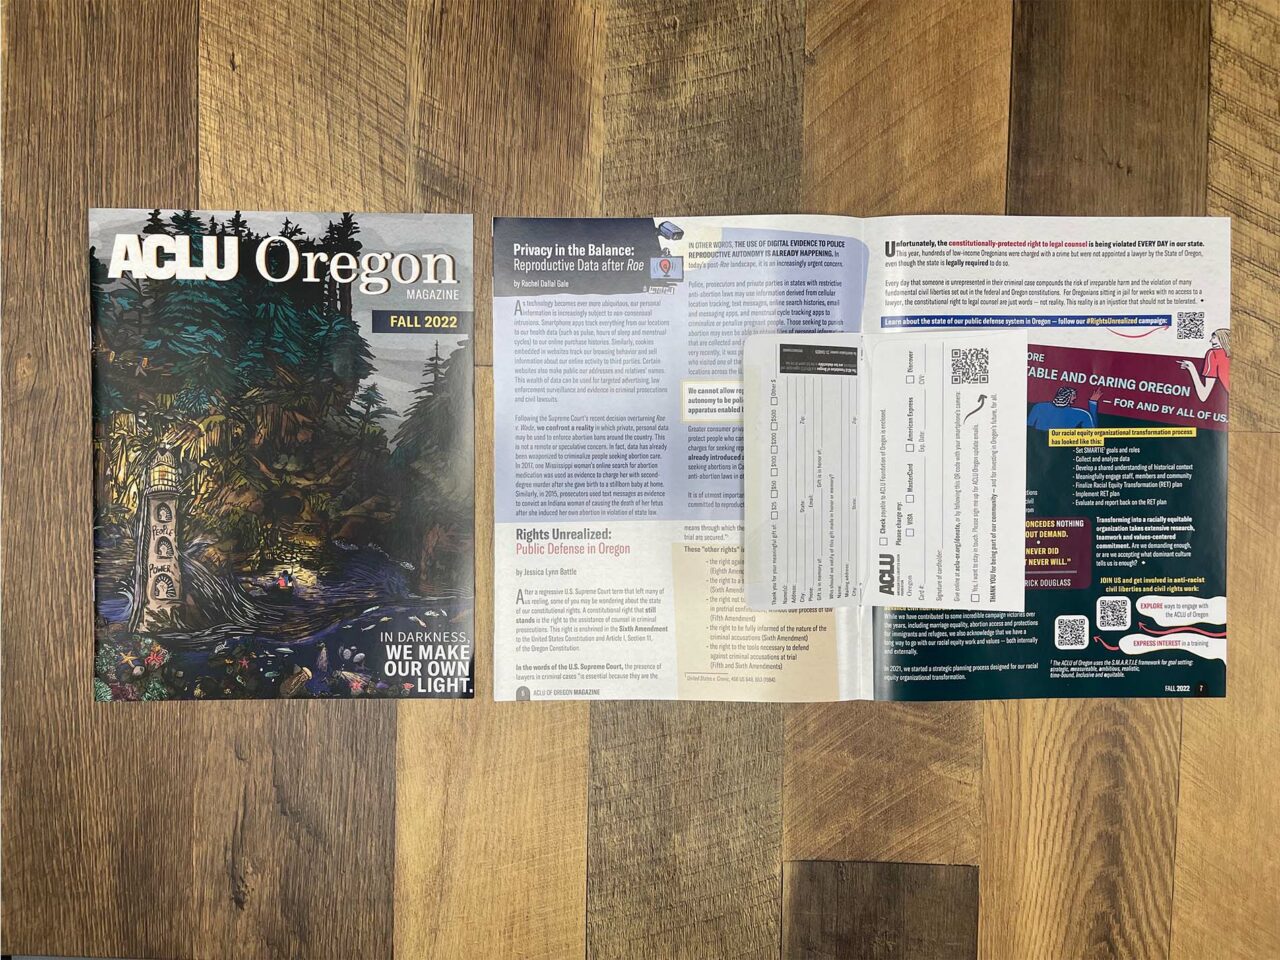 Example of Morel's printing capabilities, showing an issue of the ACLU magazine and fundraising donation return slip